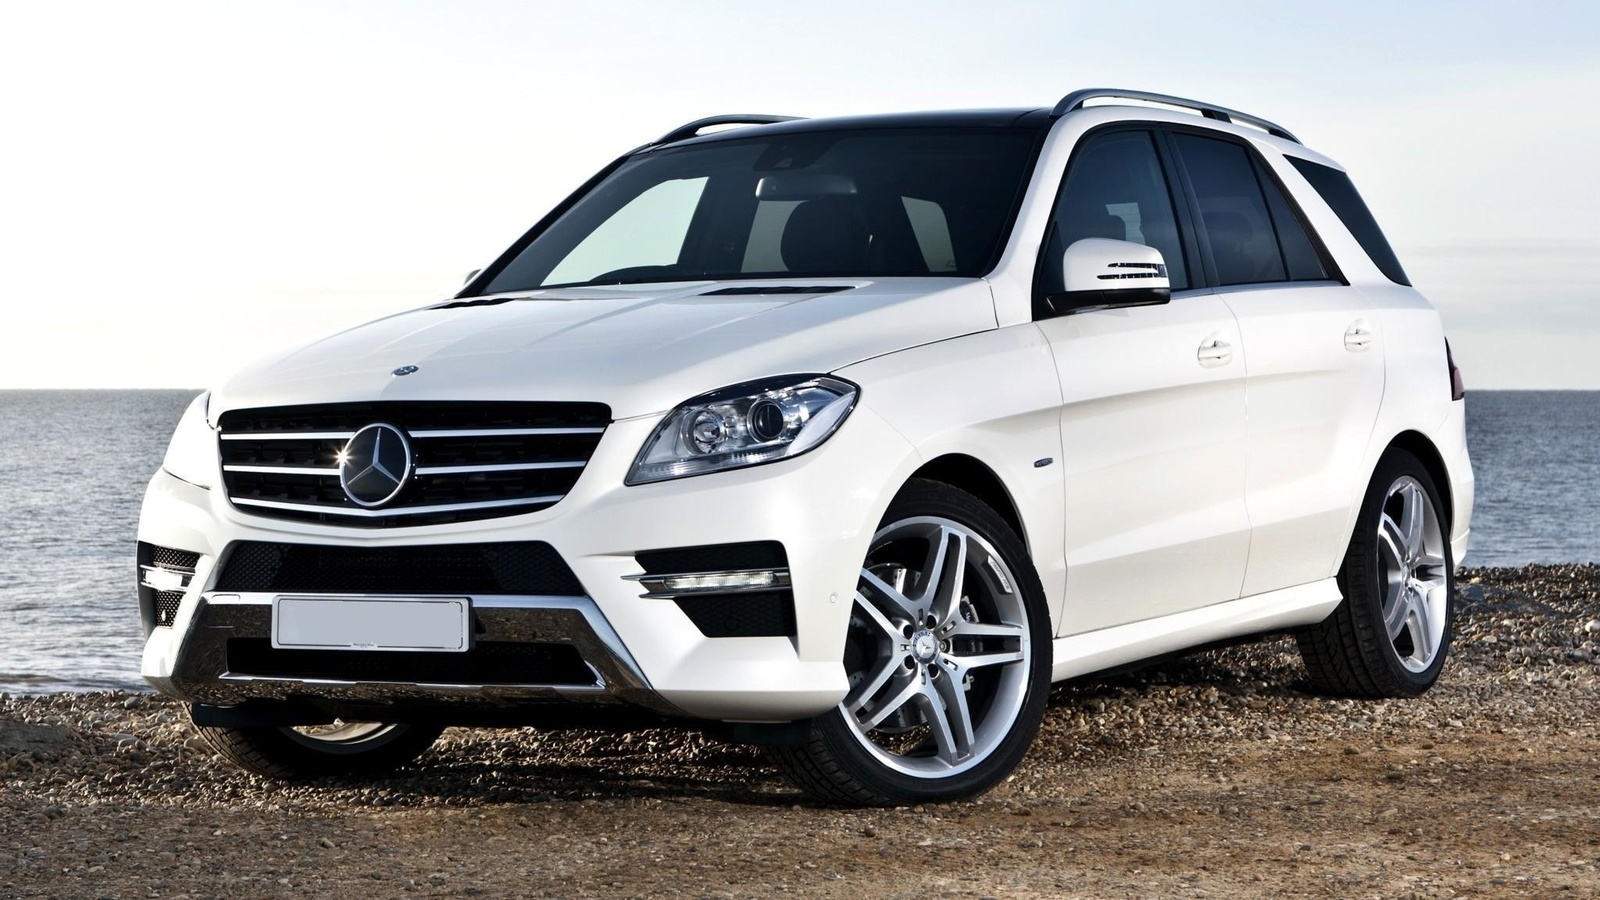 bluetec, new, Car, mercedes, white, wallpapers, 2012, sportpackage, beautiful, benz, amg, ml350